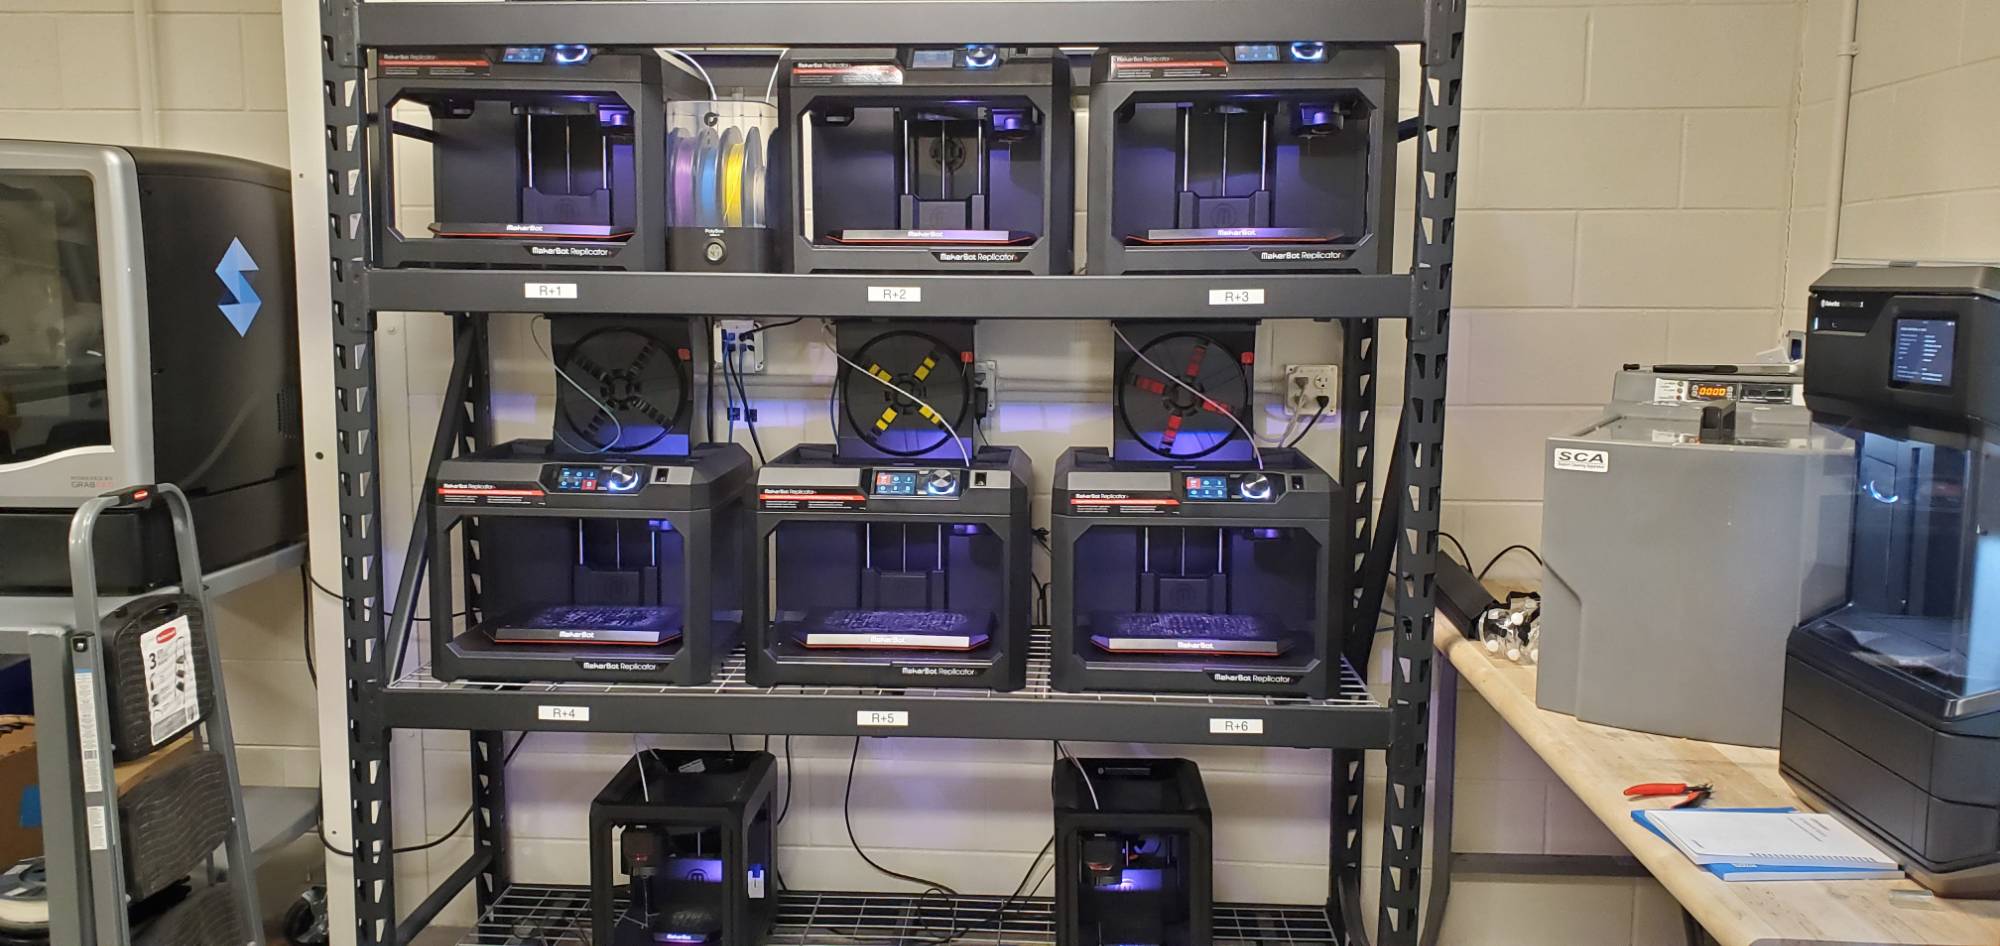 makerbot 3D printer rack in the rapid prototyping lab